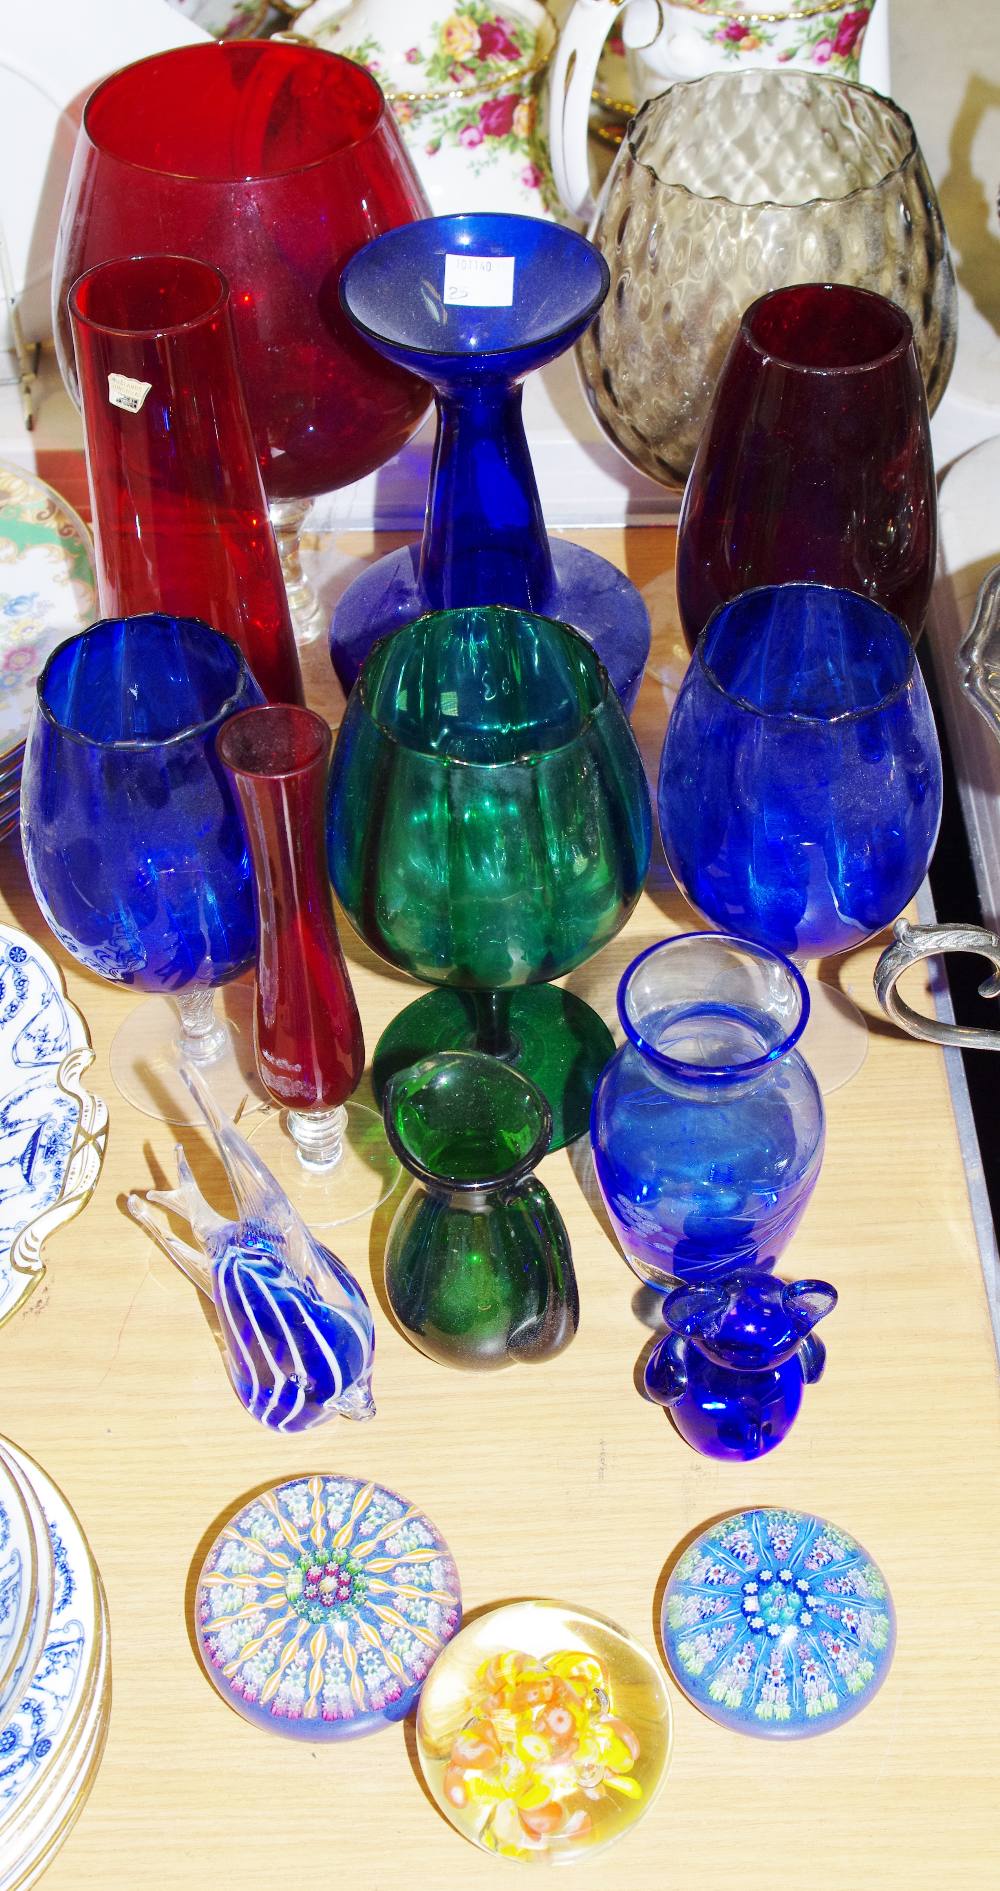 Coloured Glass - Perthshire milifiore paperweight, another; cranberry glass goblets, bud vases,